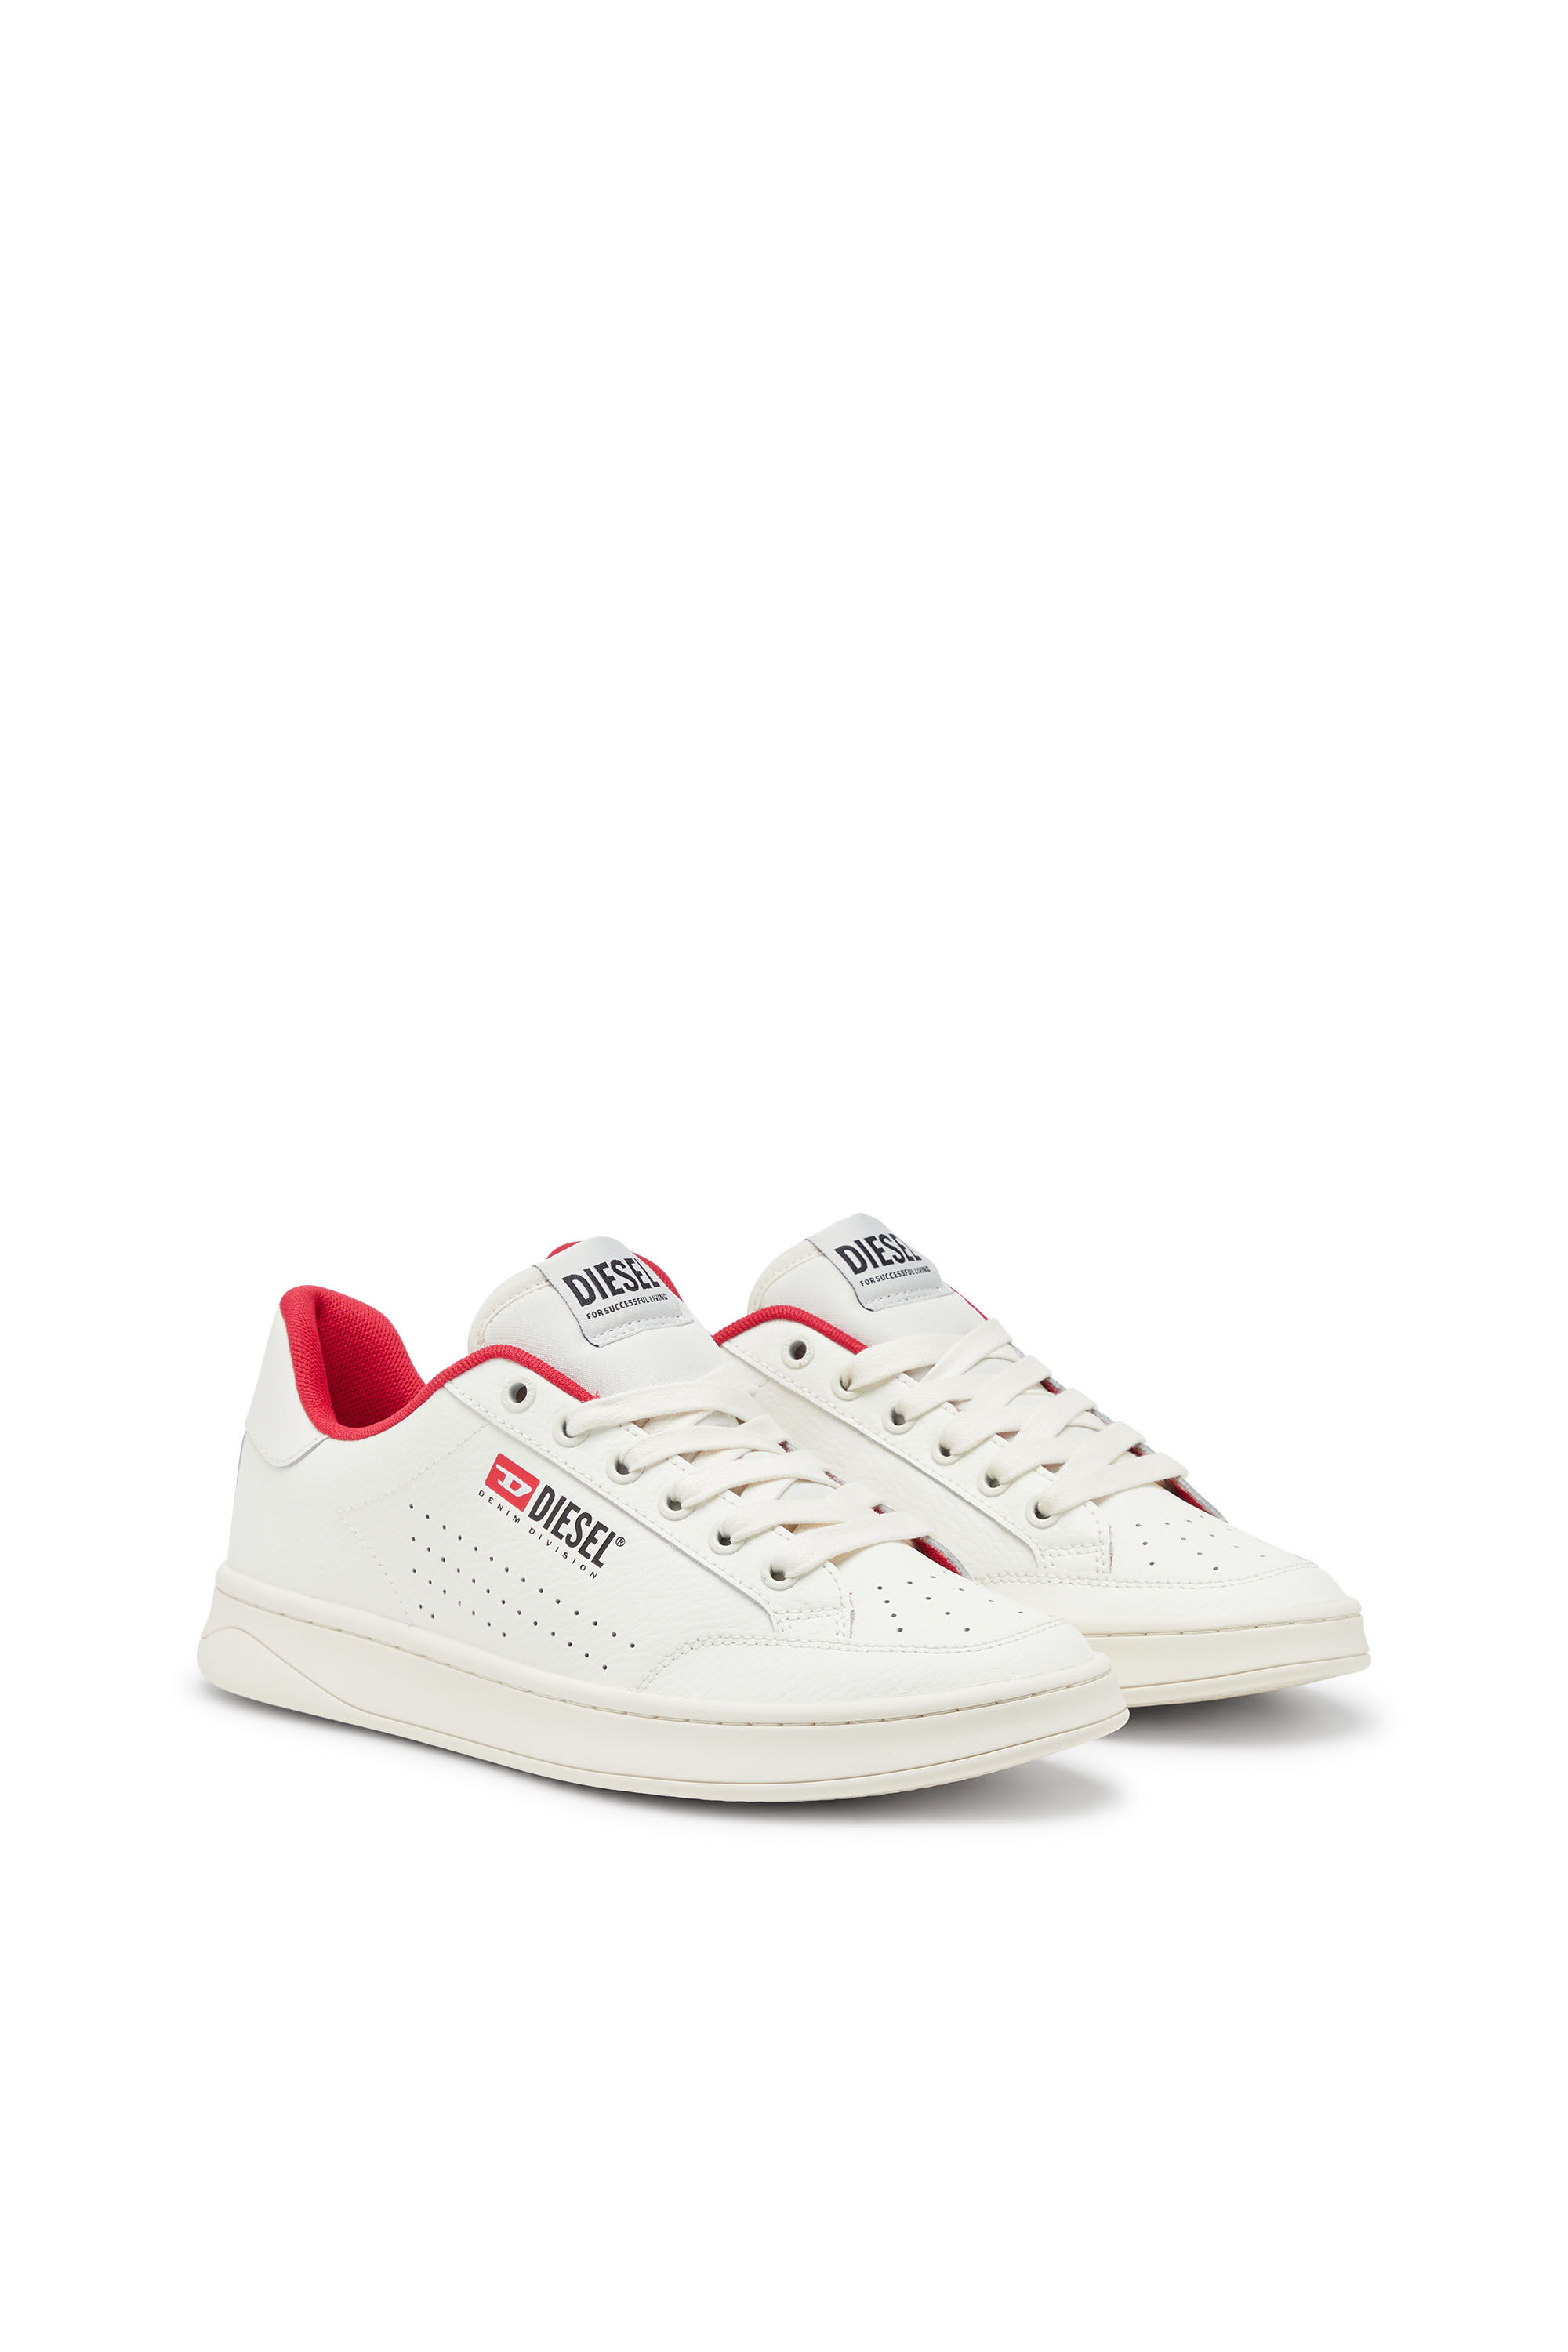 Diesel - S-ATHENE VTG, Man S-Athene-Retro sneakers in perforated leather in Multicolor - Image 2